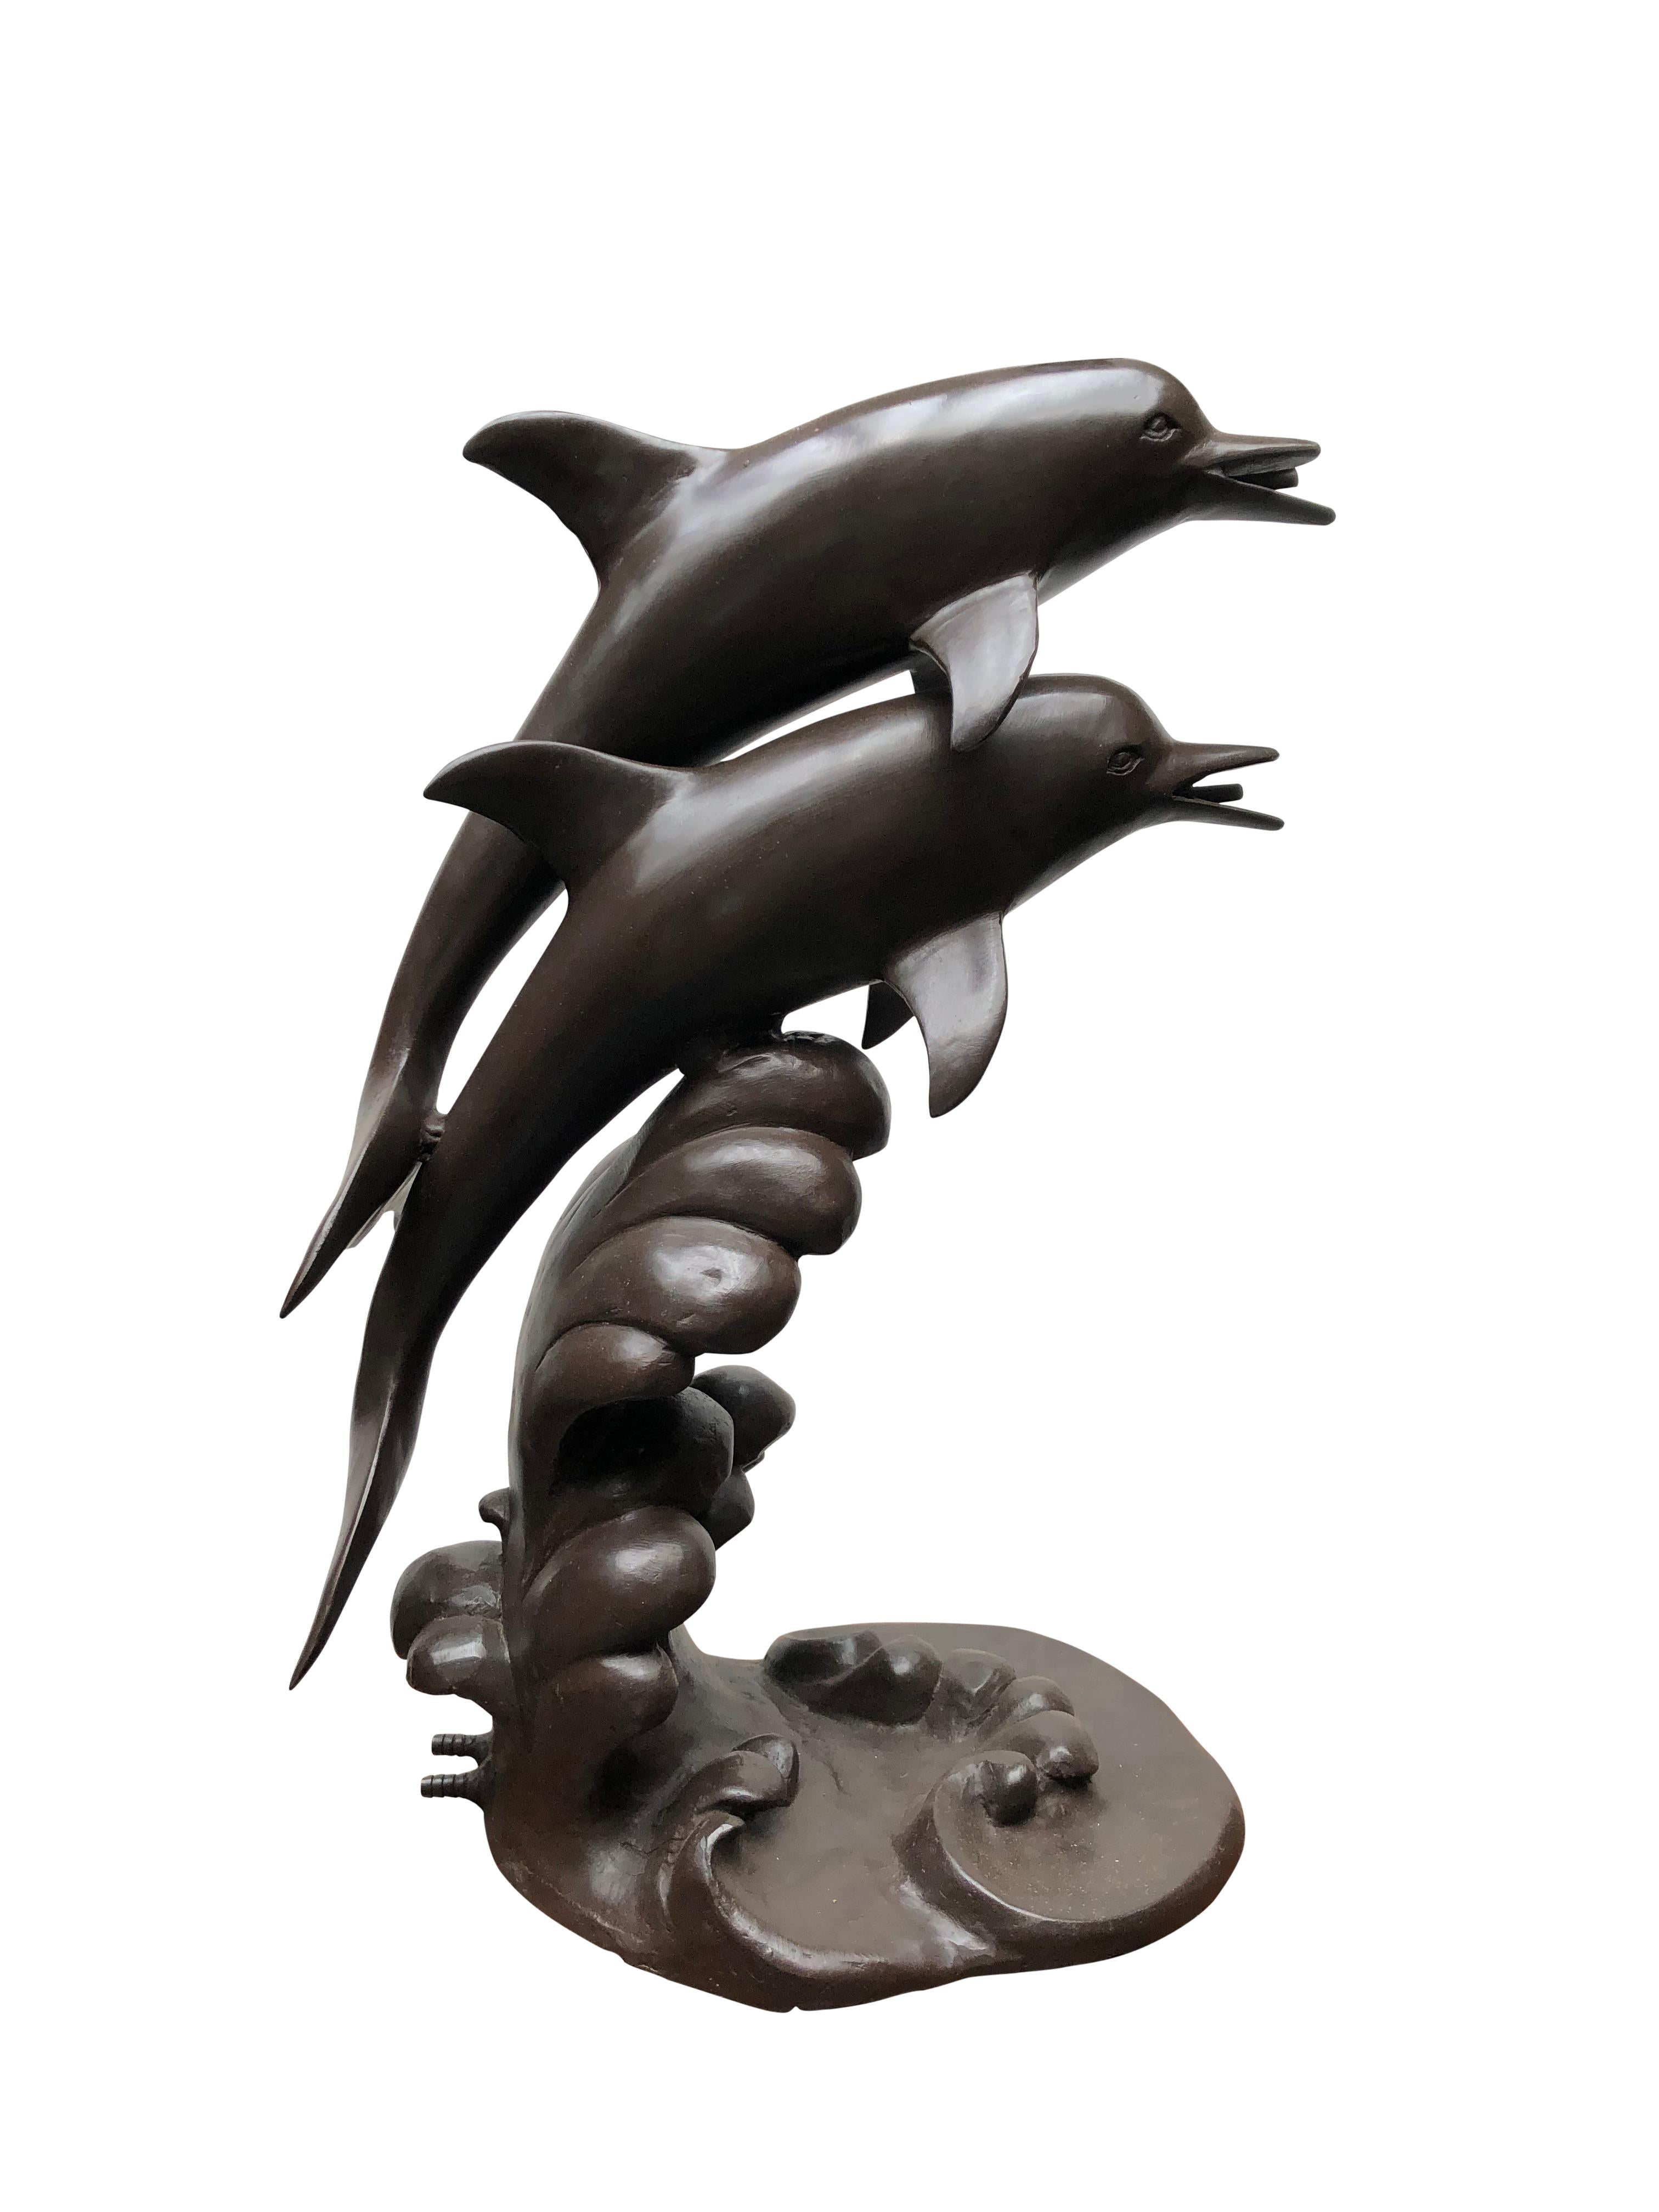 A stunning bronze Dolphin Fountain Garden Art, 20th century. Great for a pond or ornamental feature. Two dolphins each with a water spout in the mouth and at the base. Patina to the bronze is superb and this is offered in excellent shape. Of course